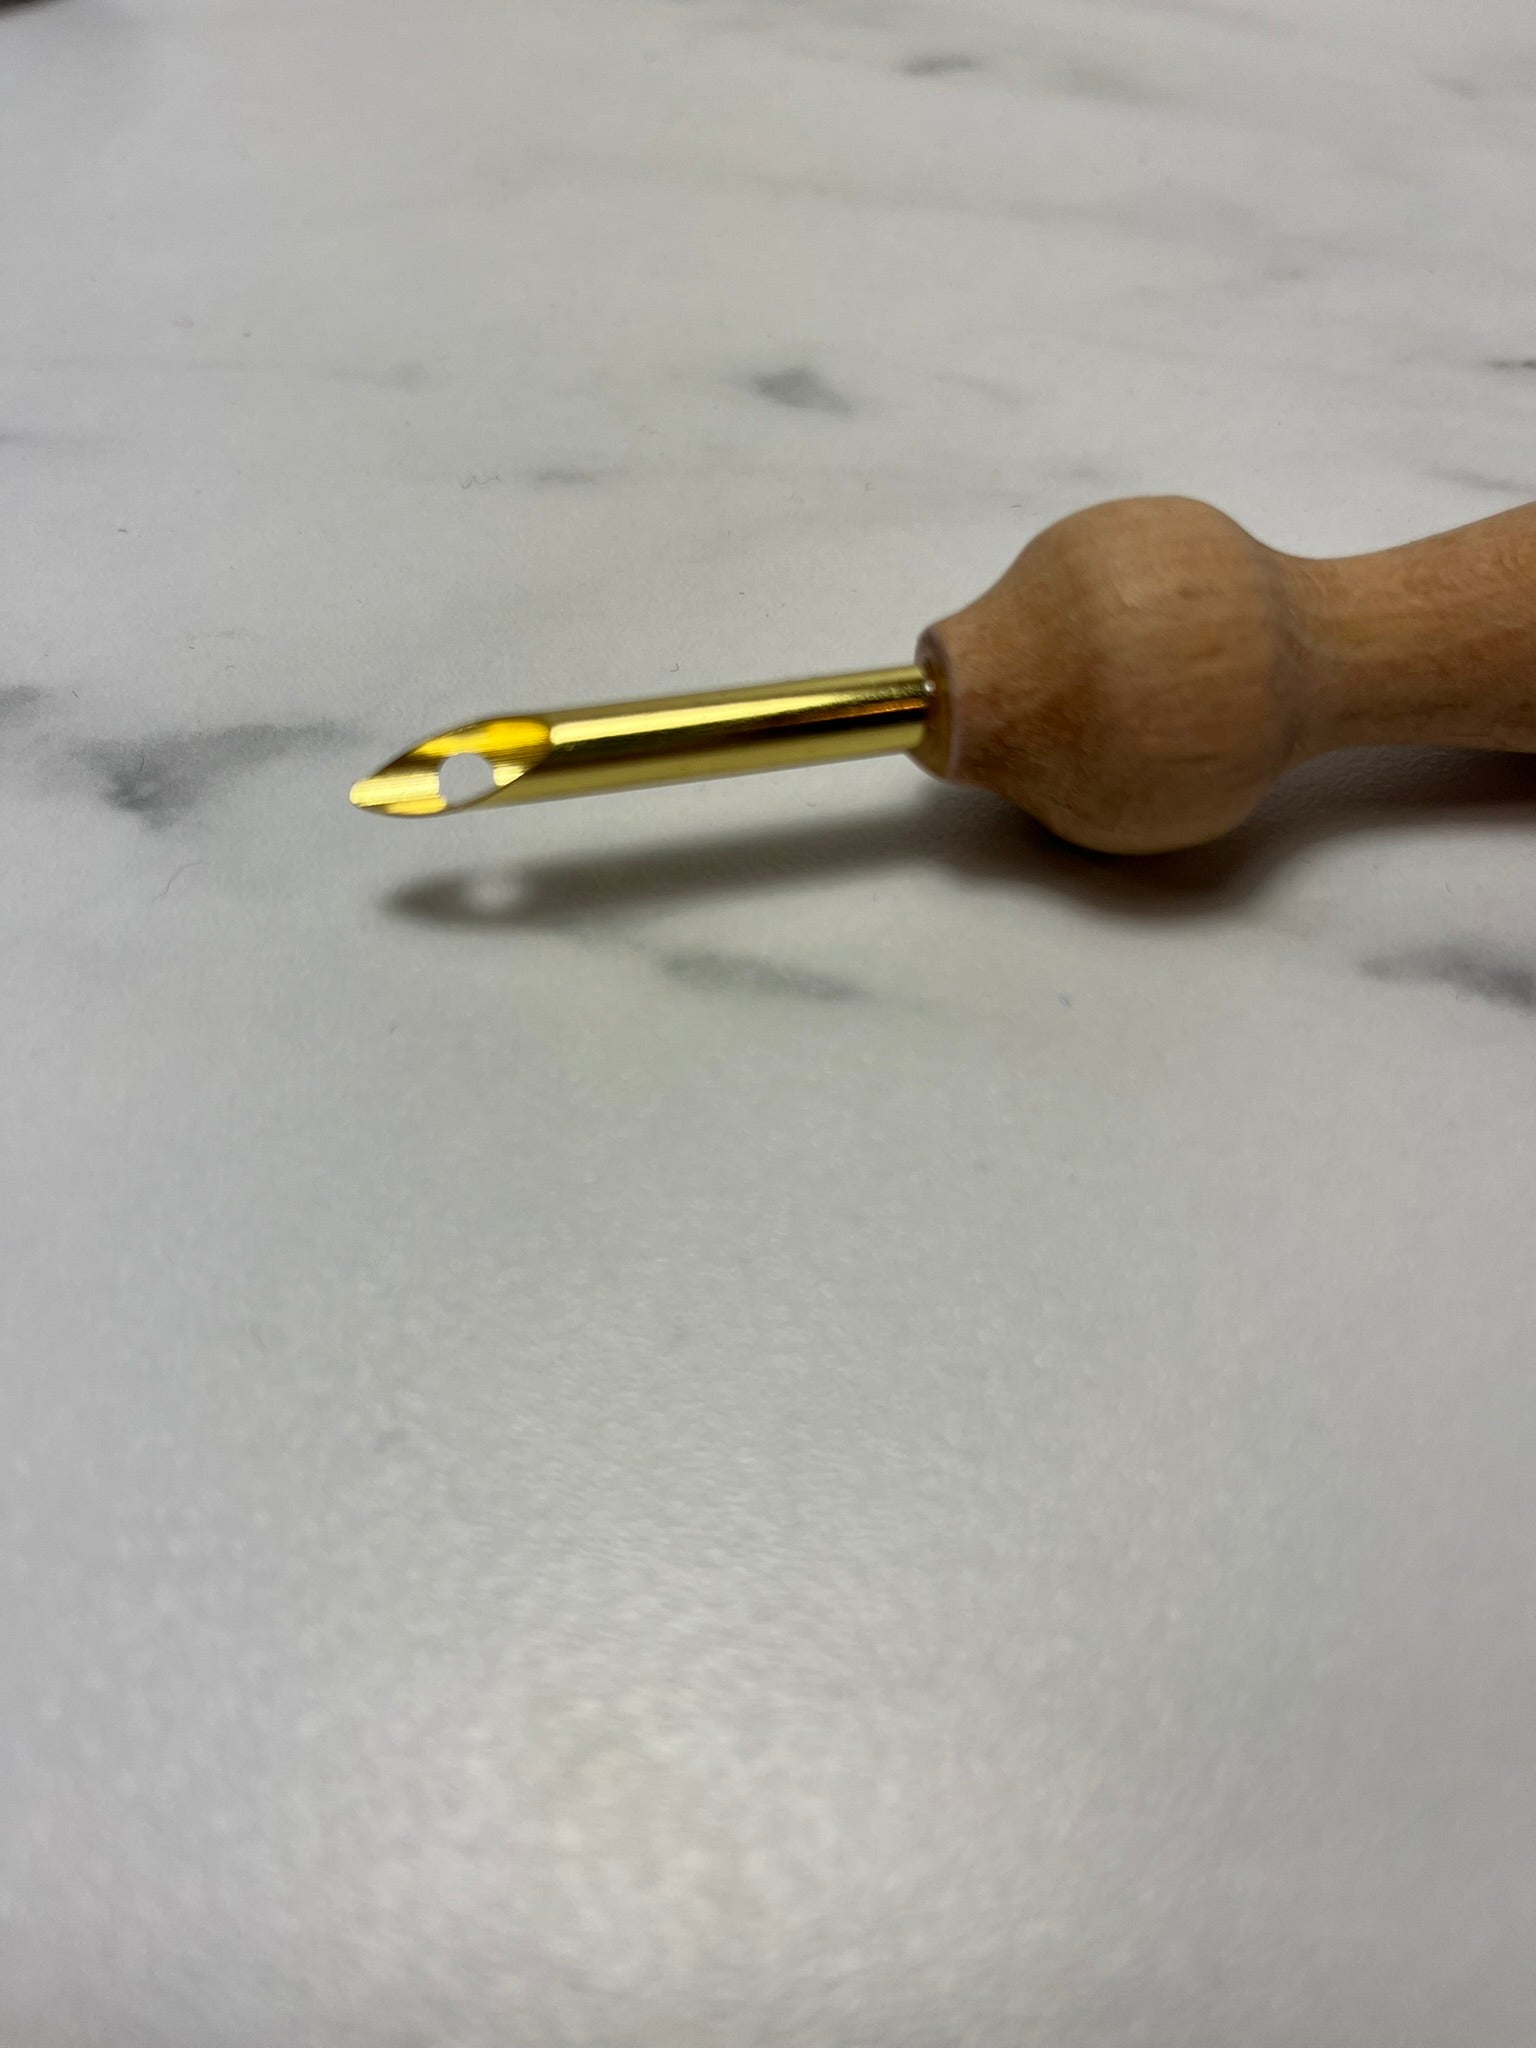 6 Wood Punch Needle by Loops & Threads®